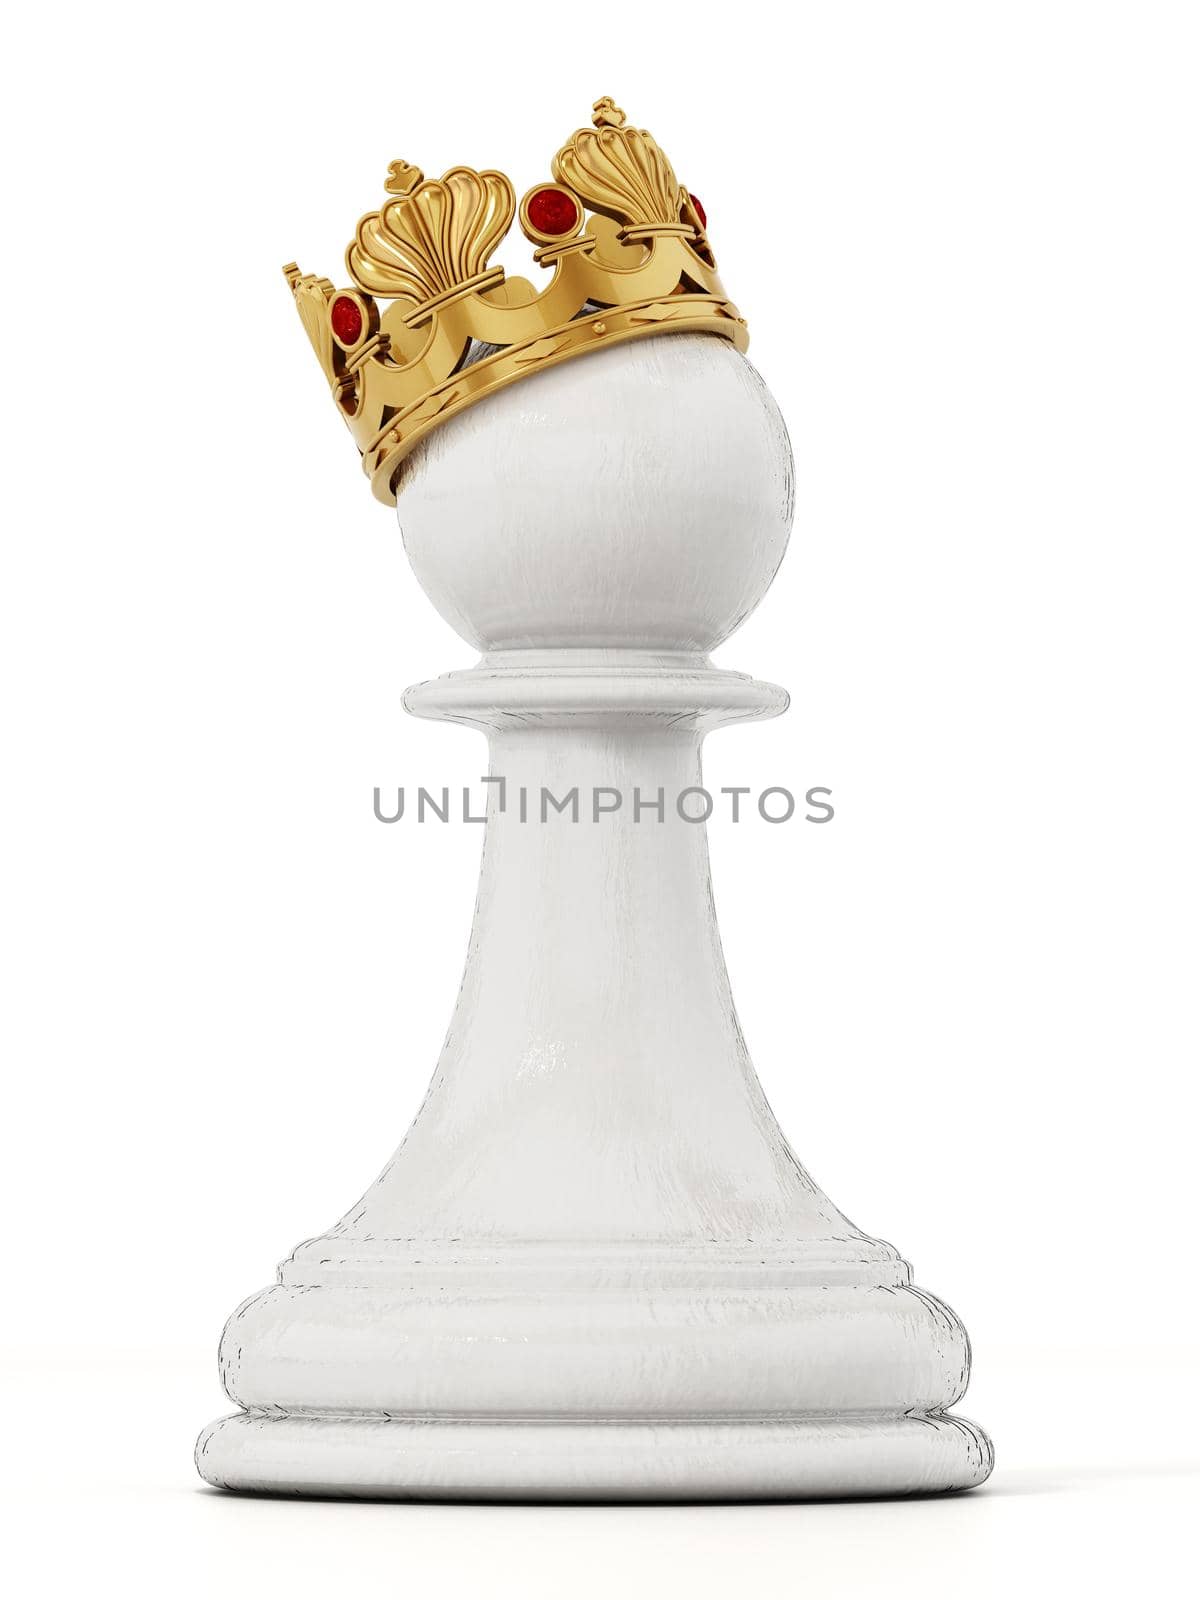 White chess pawn with golden crown. 3D illustration.